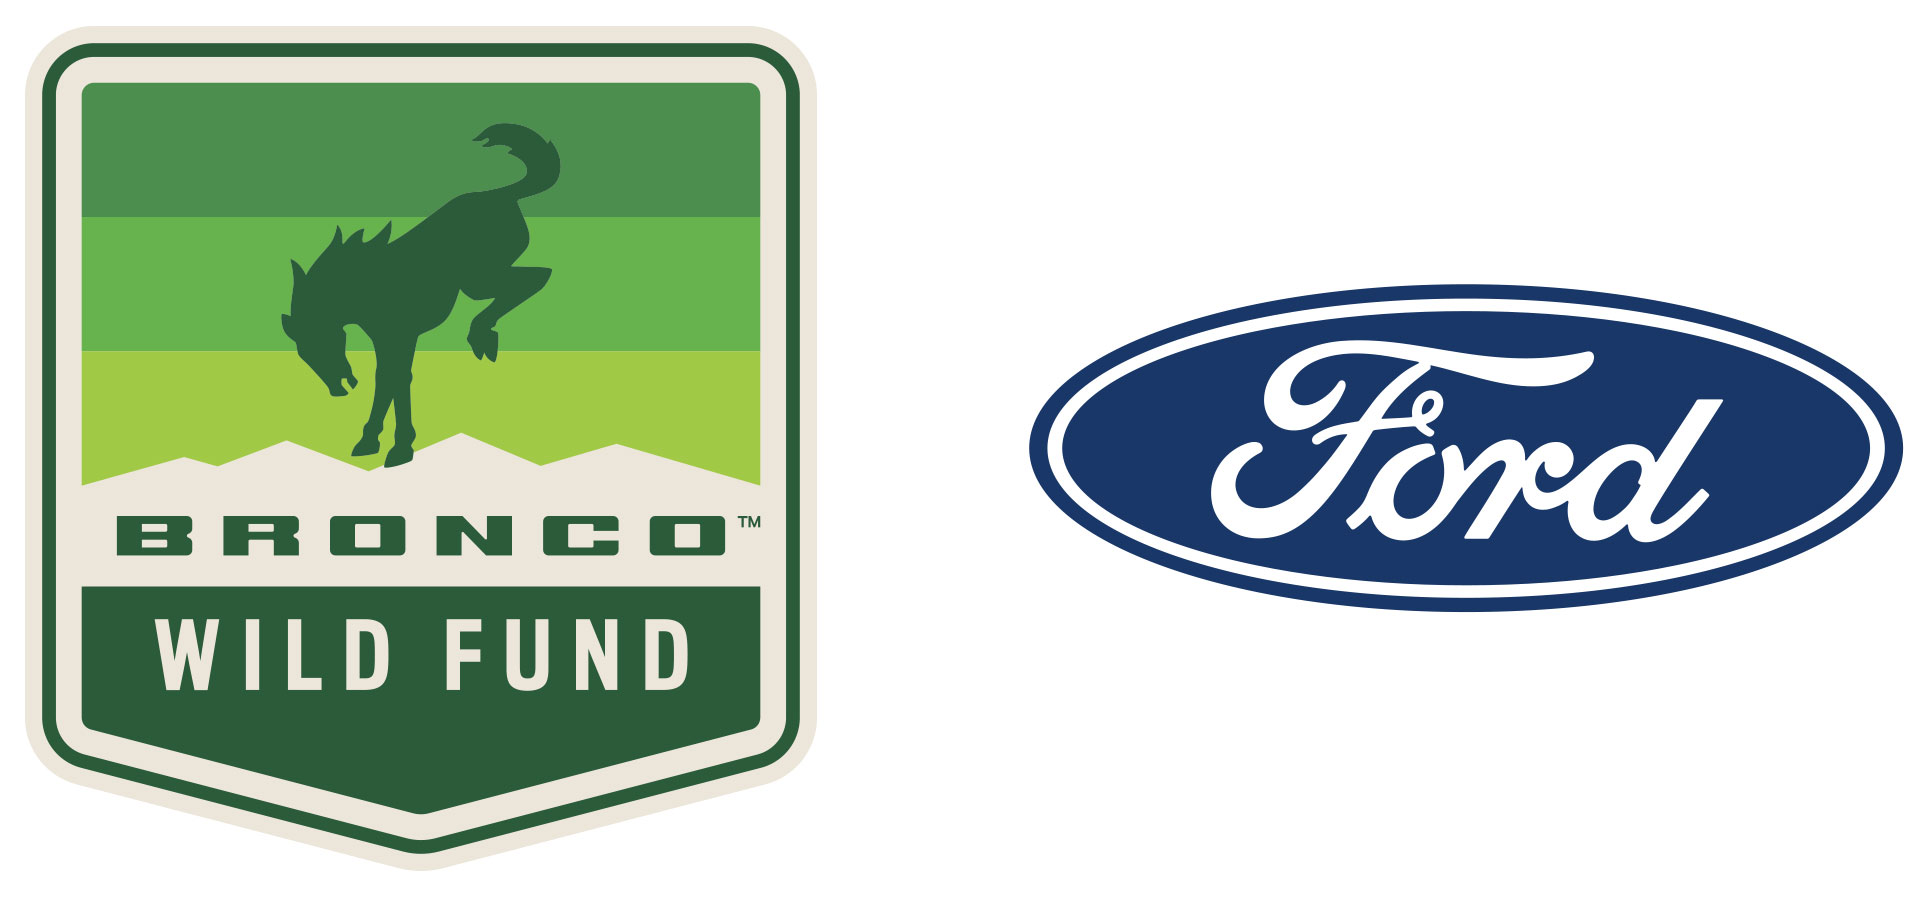 Bronco Wild Fund and Ford logo